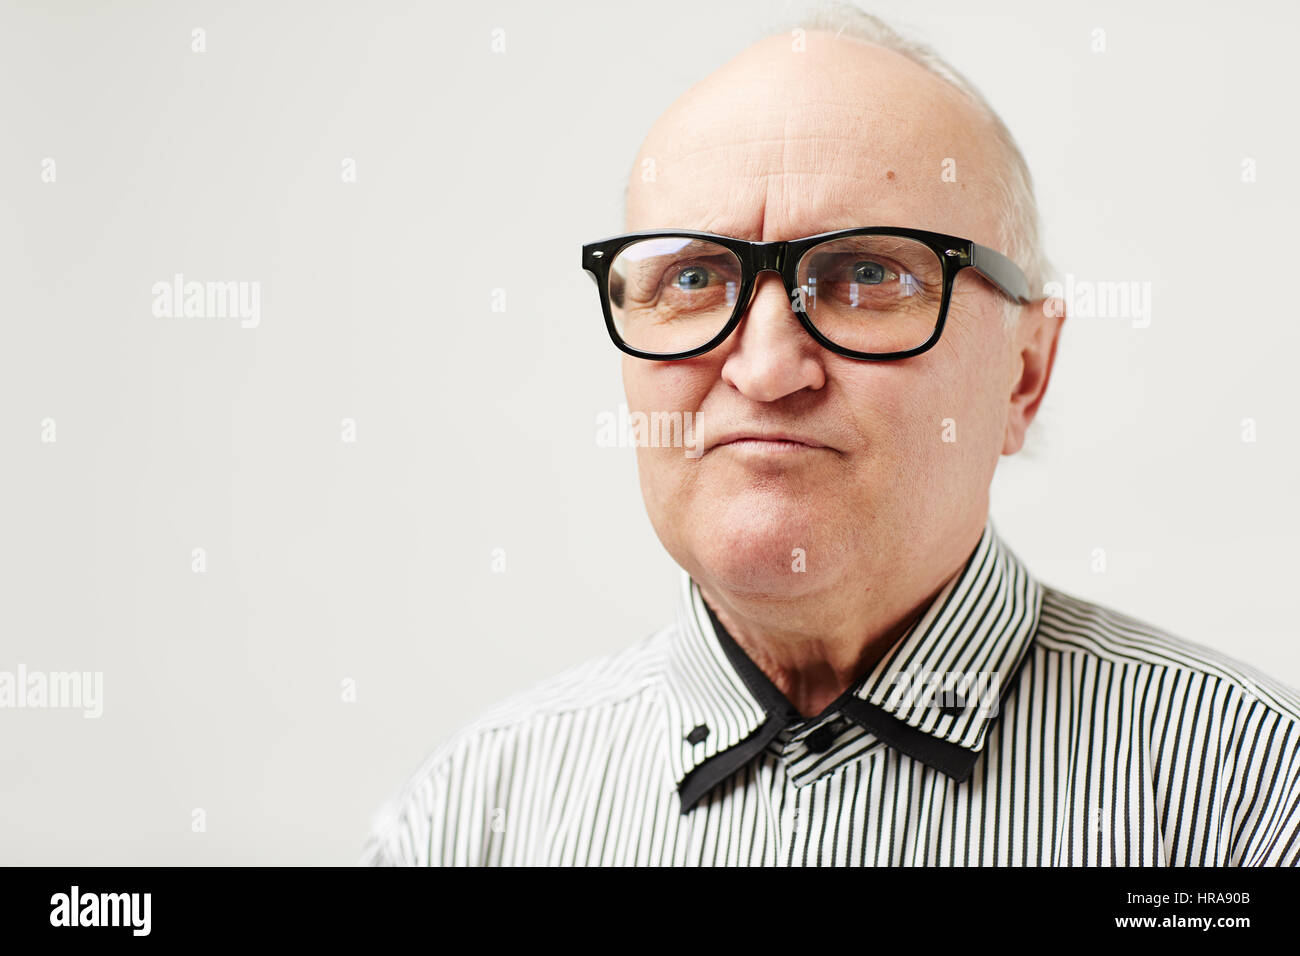 Portrait of funny male senior with receding hairline and eyeglasses looking to the side with pretended angry face expression Stock Photo